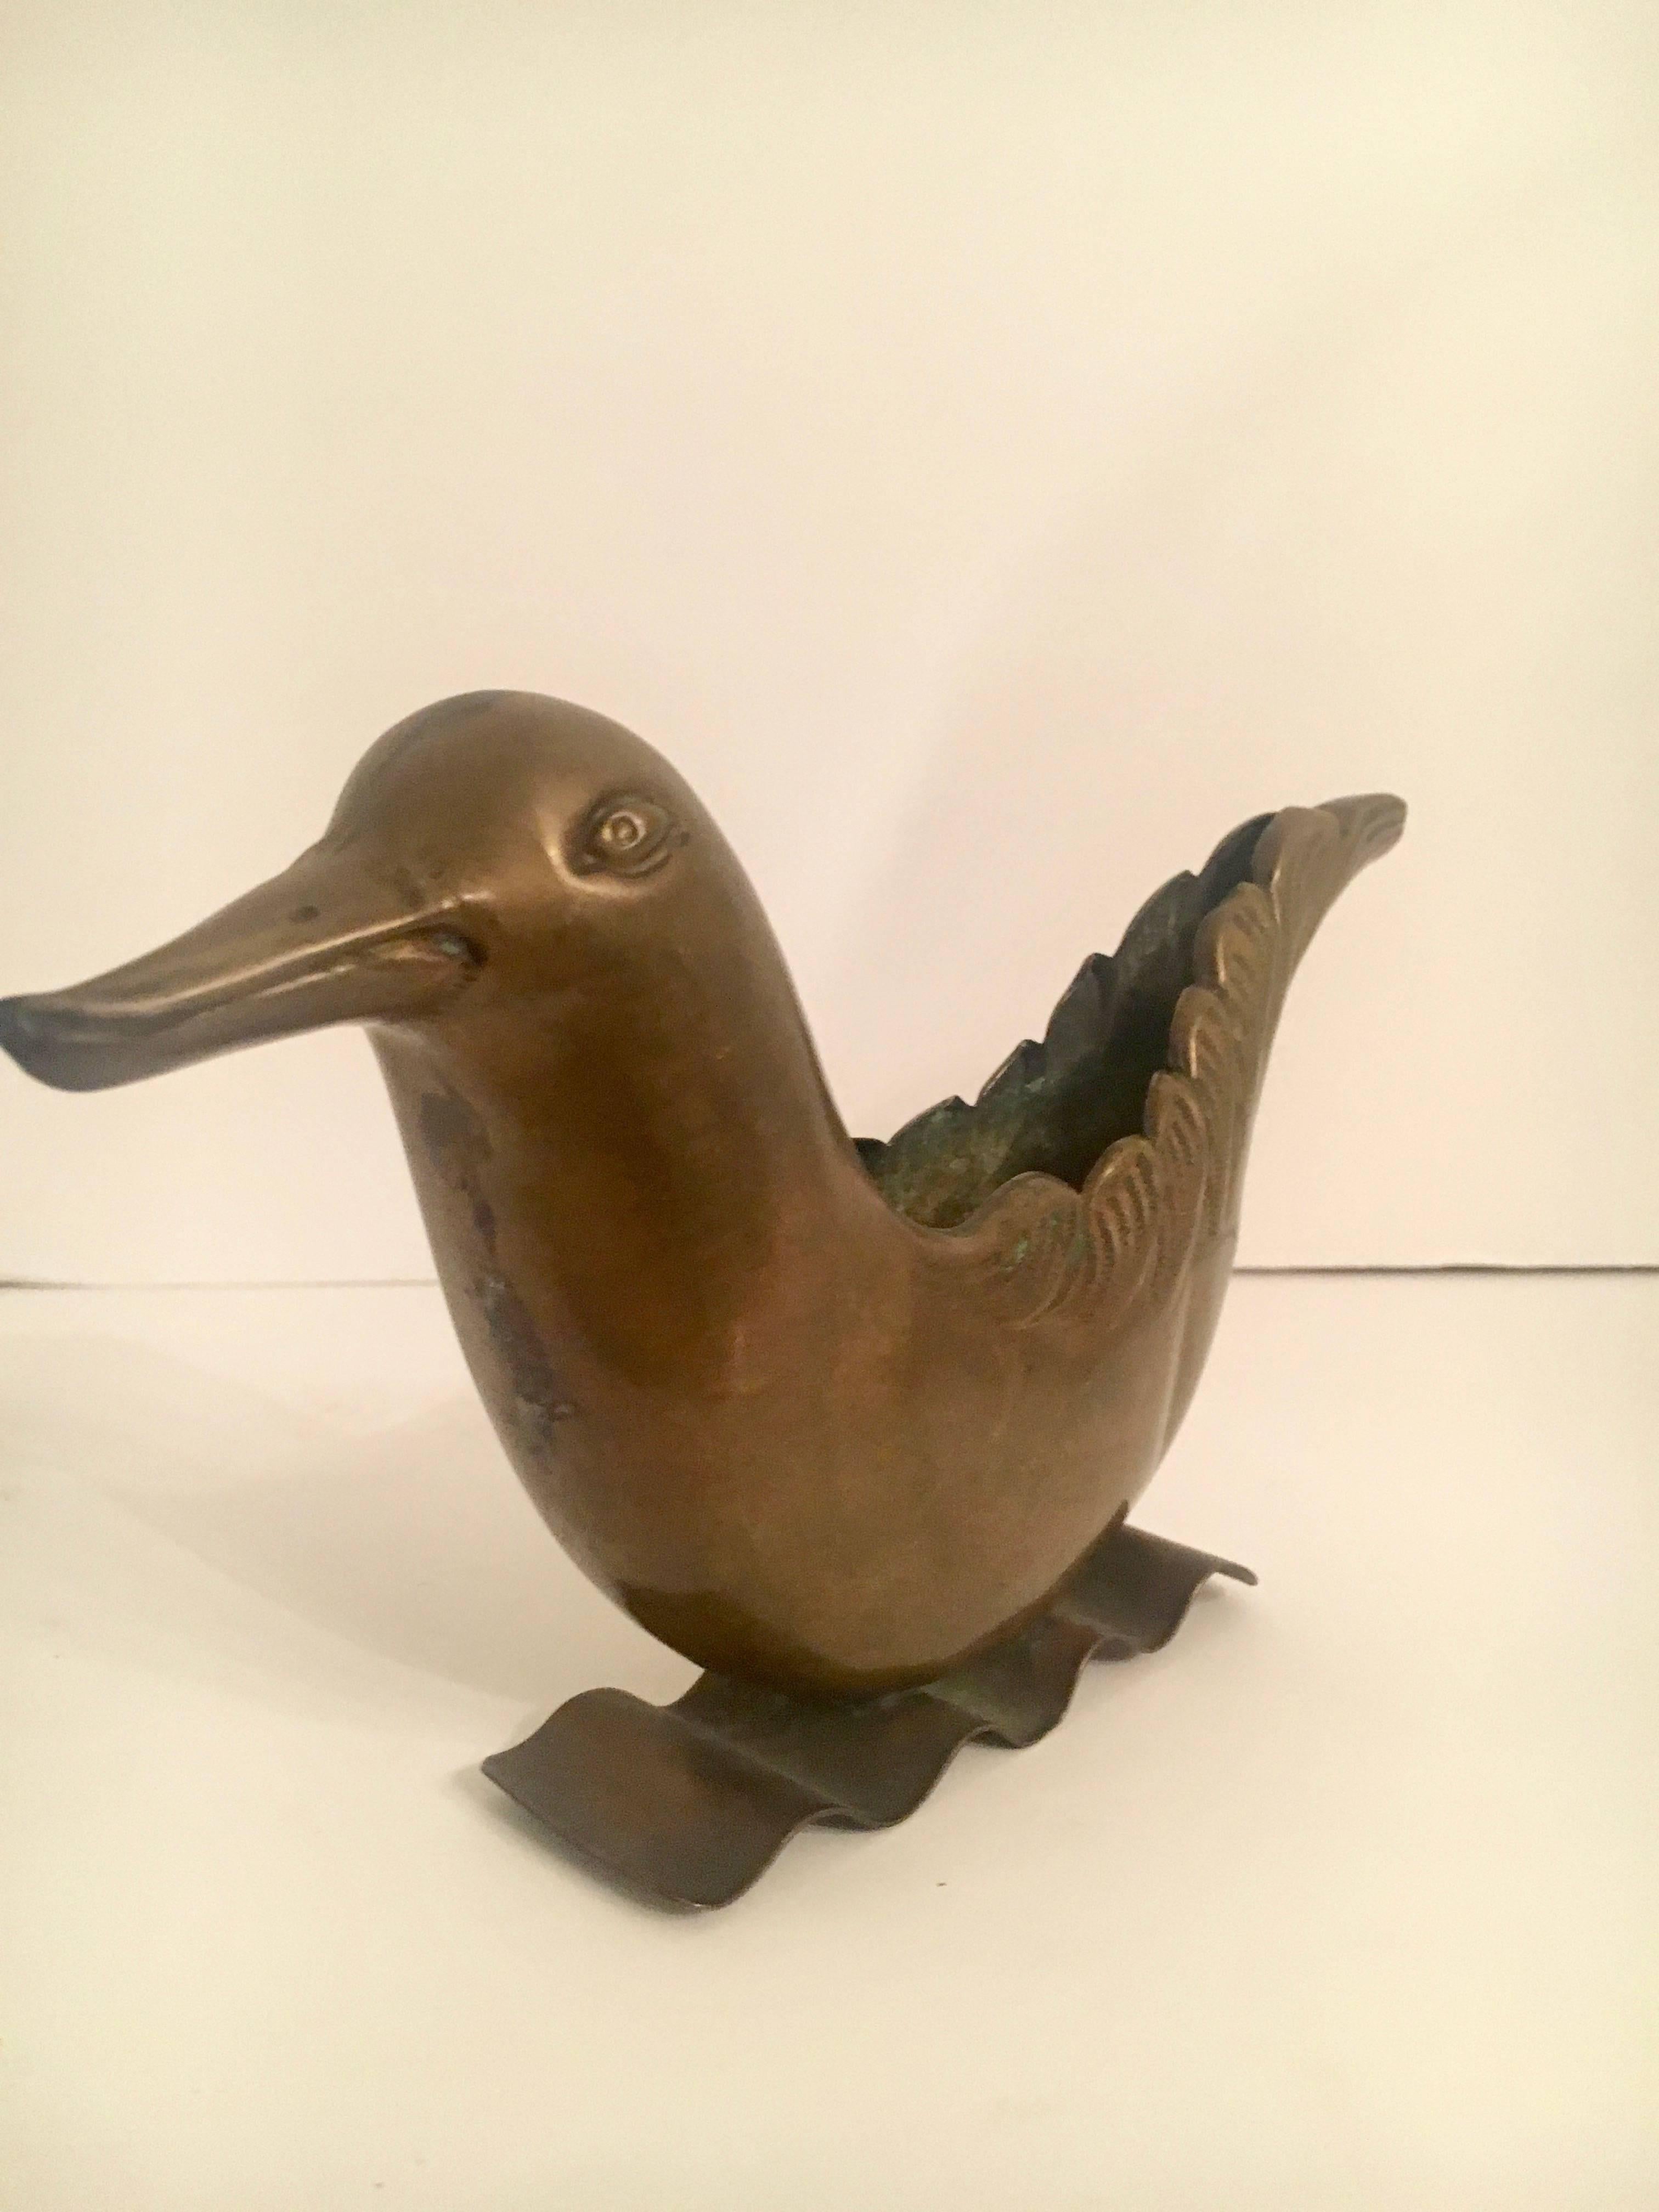 Brass Bird Urn vase - lovely decorative piece or great for small arrangements or plantings on the desk or even as a catch all for Jewelry. 

Made for the Joseph Horne Co, Although Joseph Horne stores are signs of the past, the once popular retail